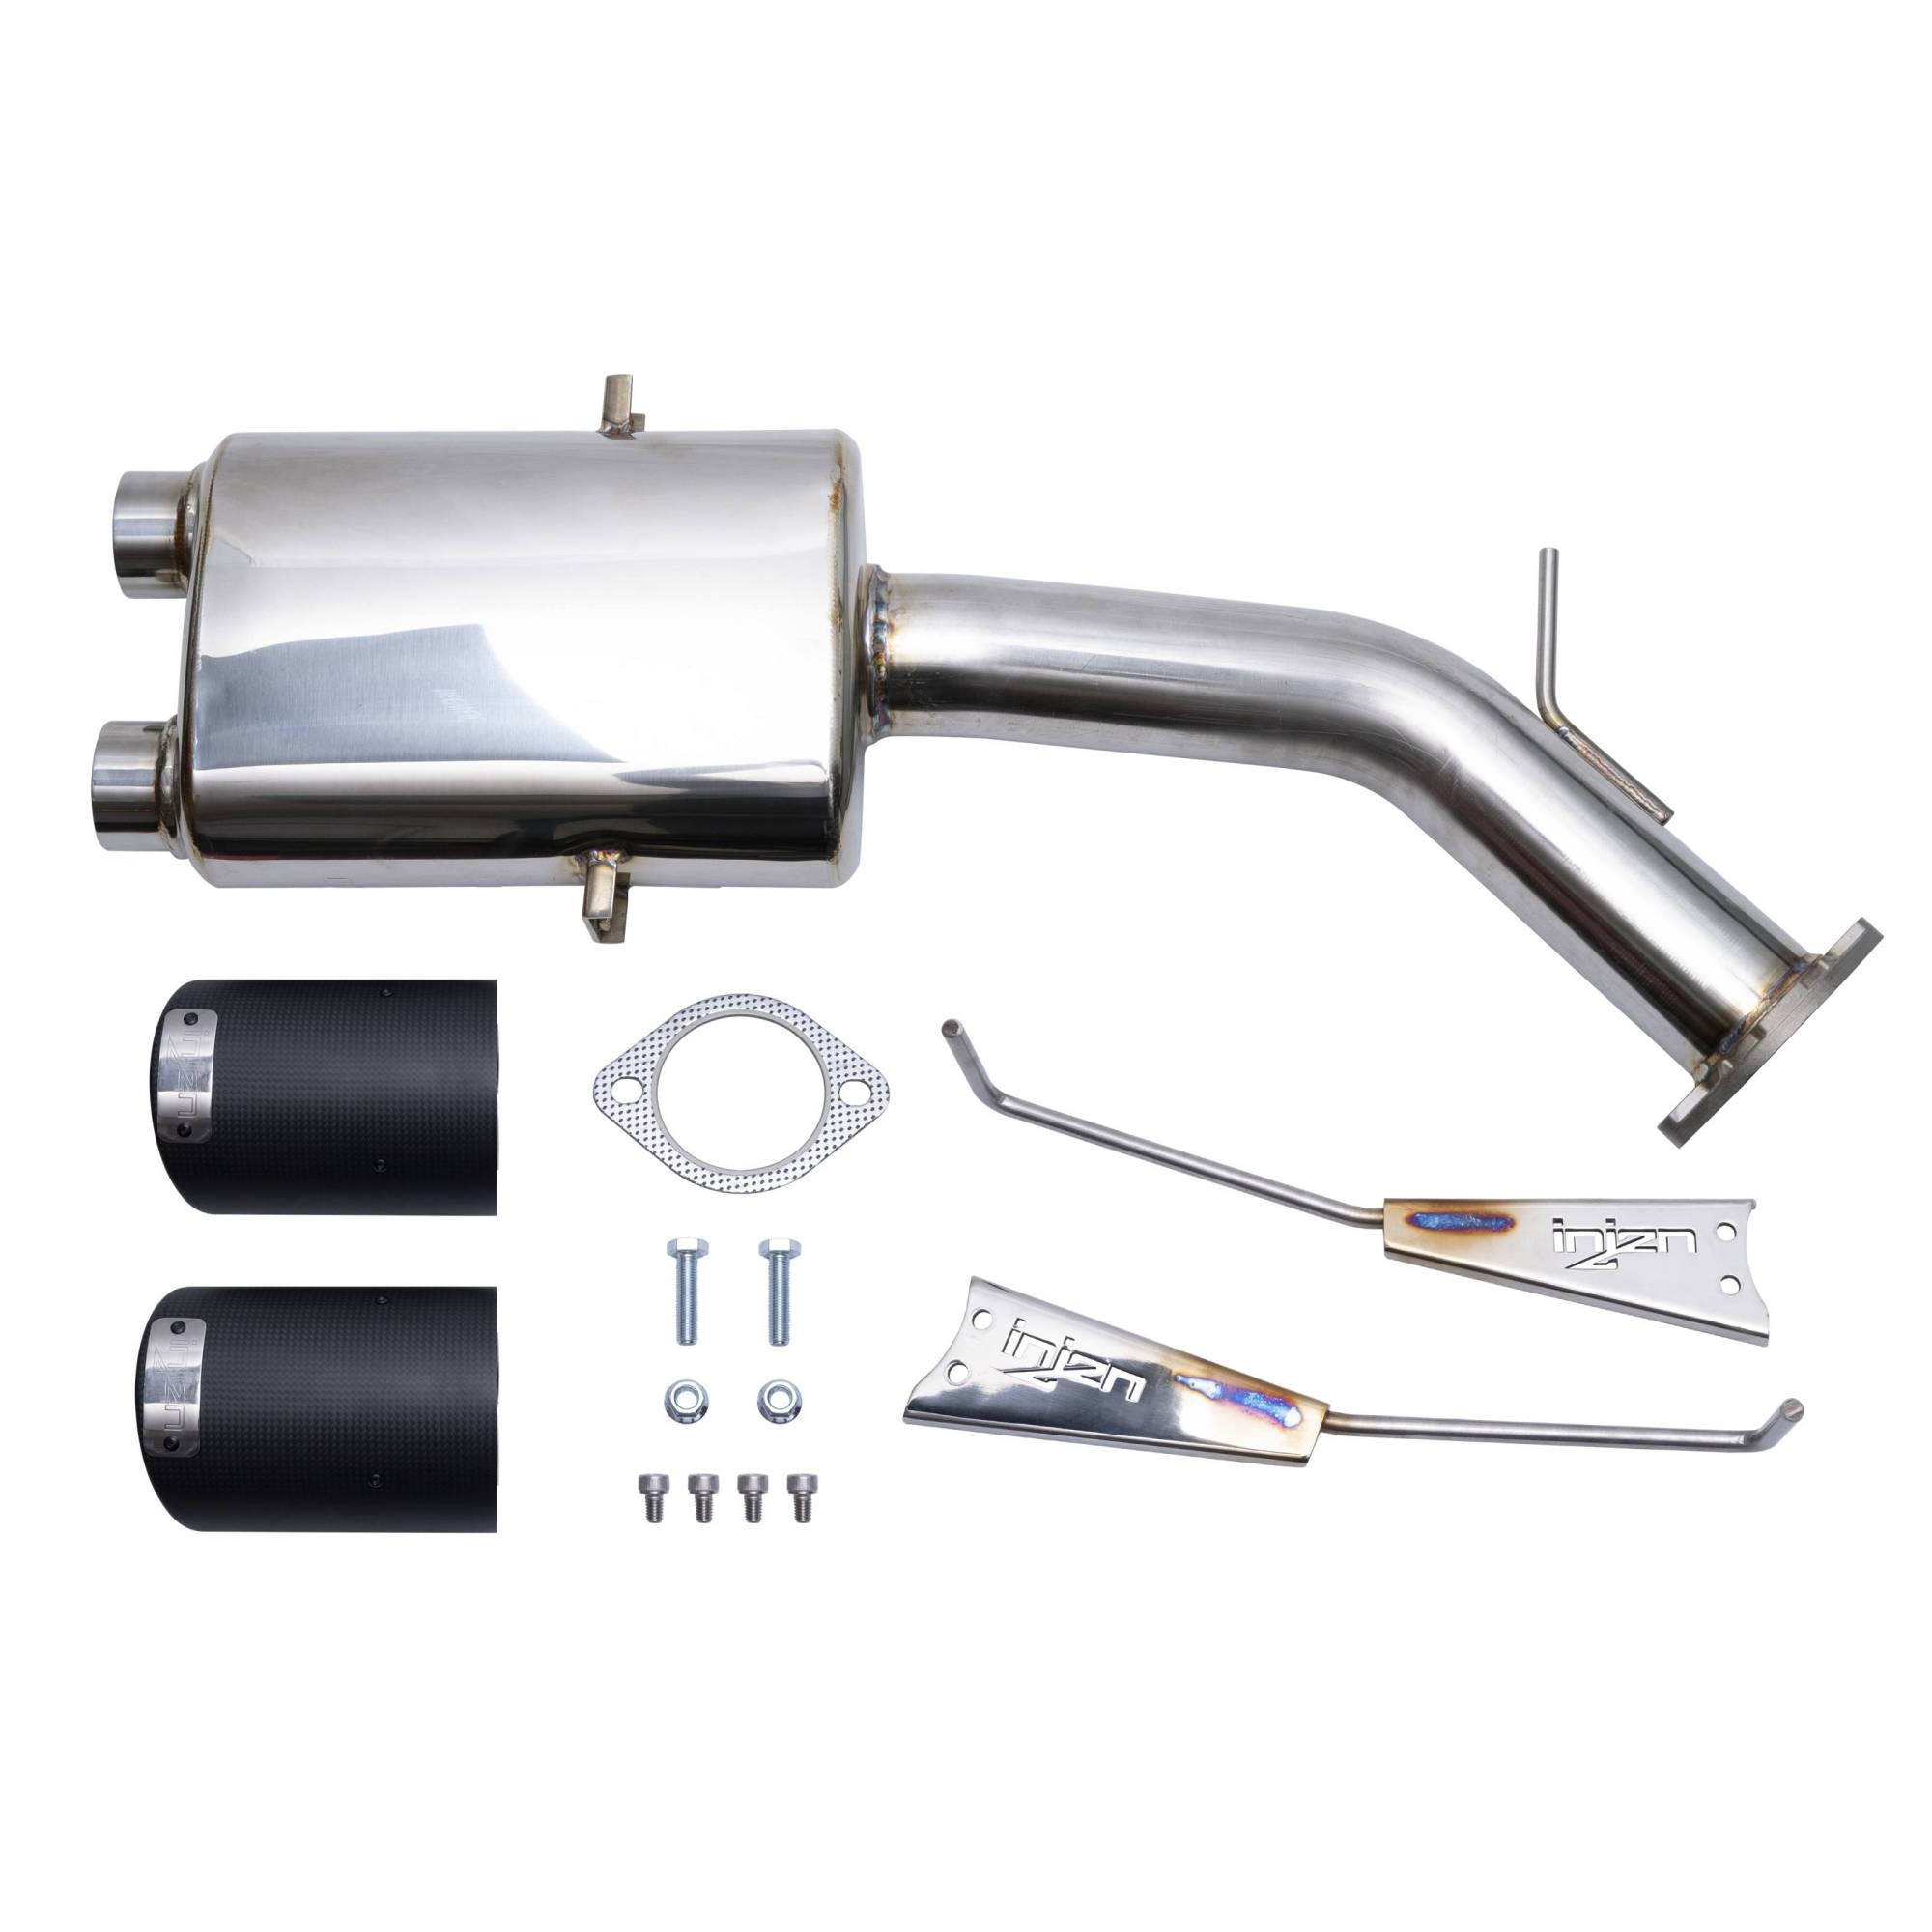 2019-2021 Hyundai Veloster 1.6L Turbo Performance Axle-Back Exhaust System